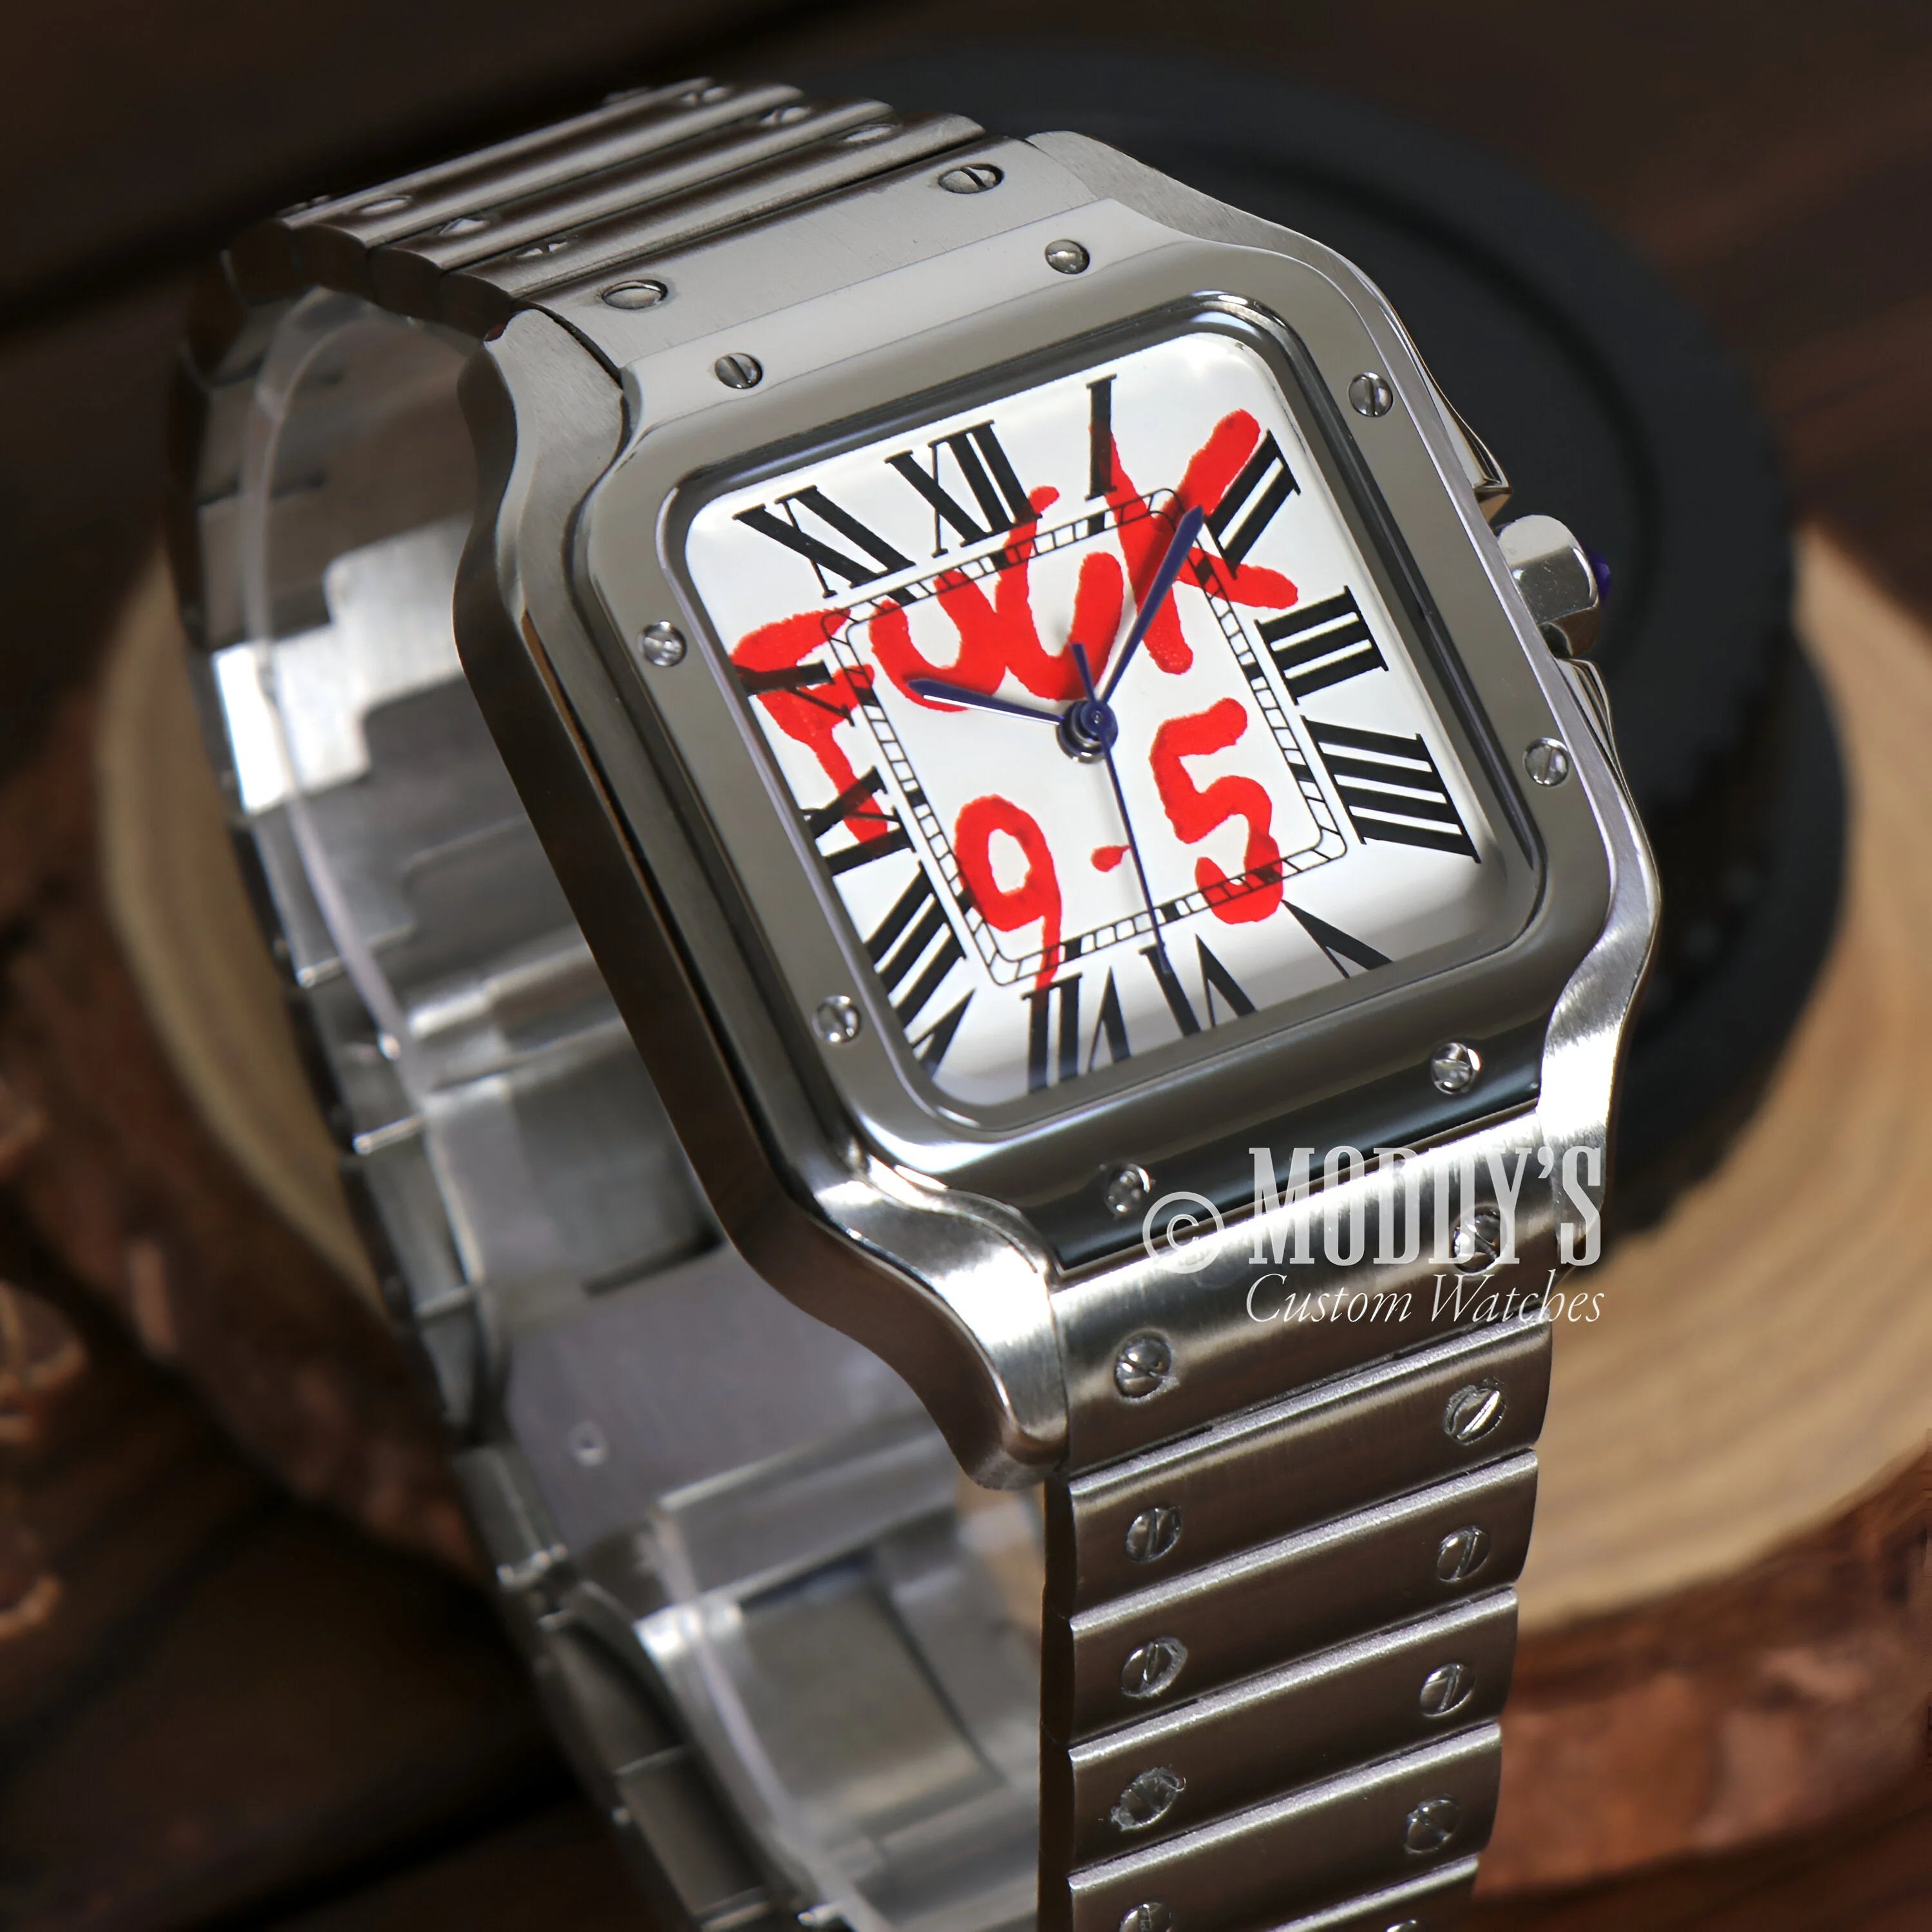 Luxury Santeiko 9-5 Wristwatch With Nh35 Automatic Movement In 904l Stainless Steel